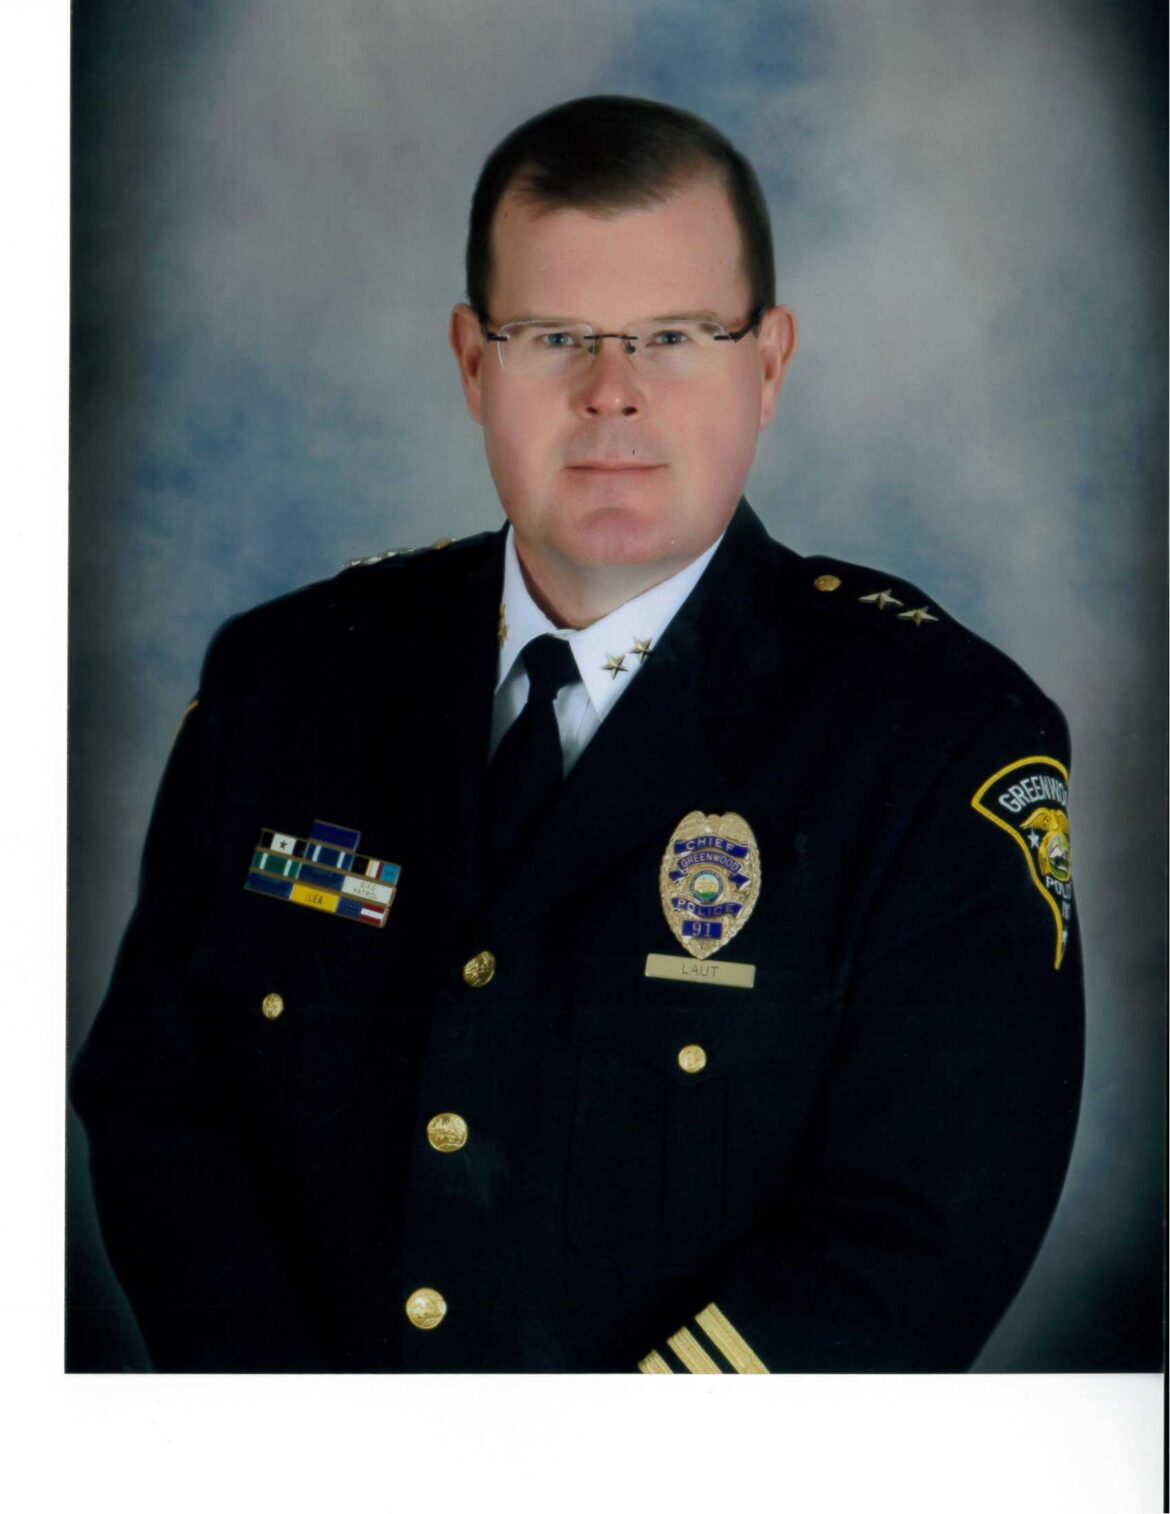 Chief Laut to retire from Greenwood Police Department